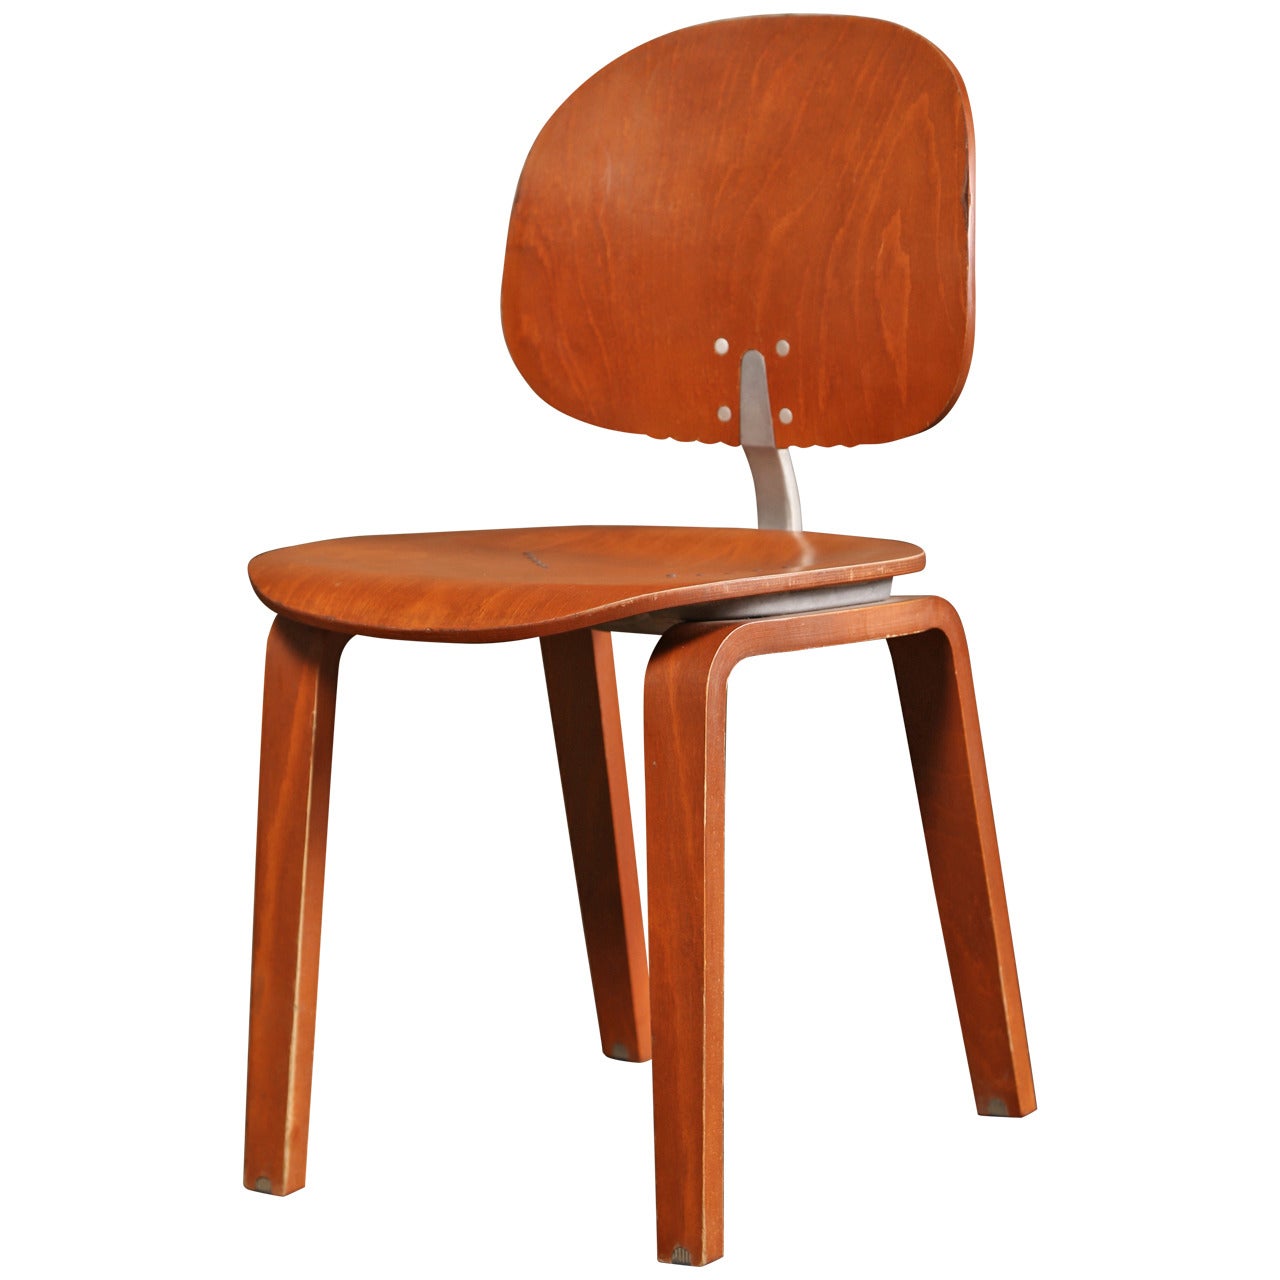 Original, Mid-Century Modern, Piretti Xylon bent plywood dining or side chair with cast aluminum spring back. This listing represents a set of ten however we have more available. In fair condition, some scratches, dings and other imperfections. 